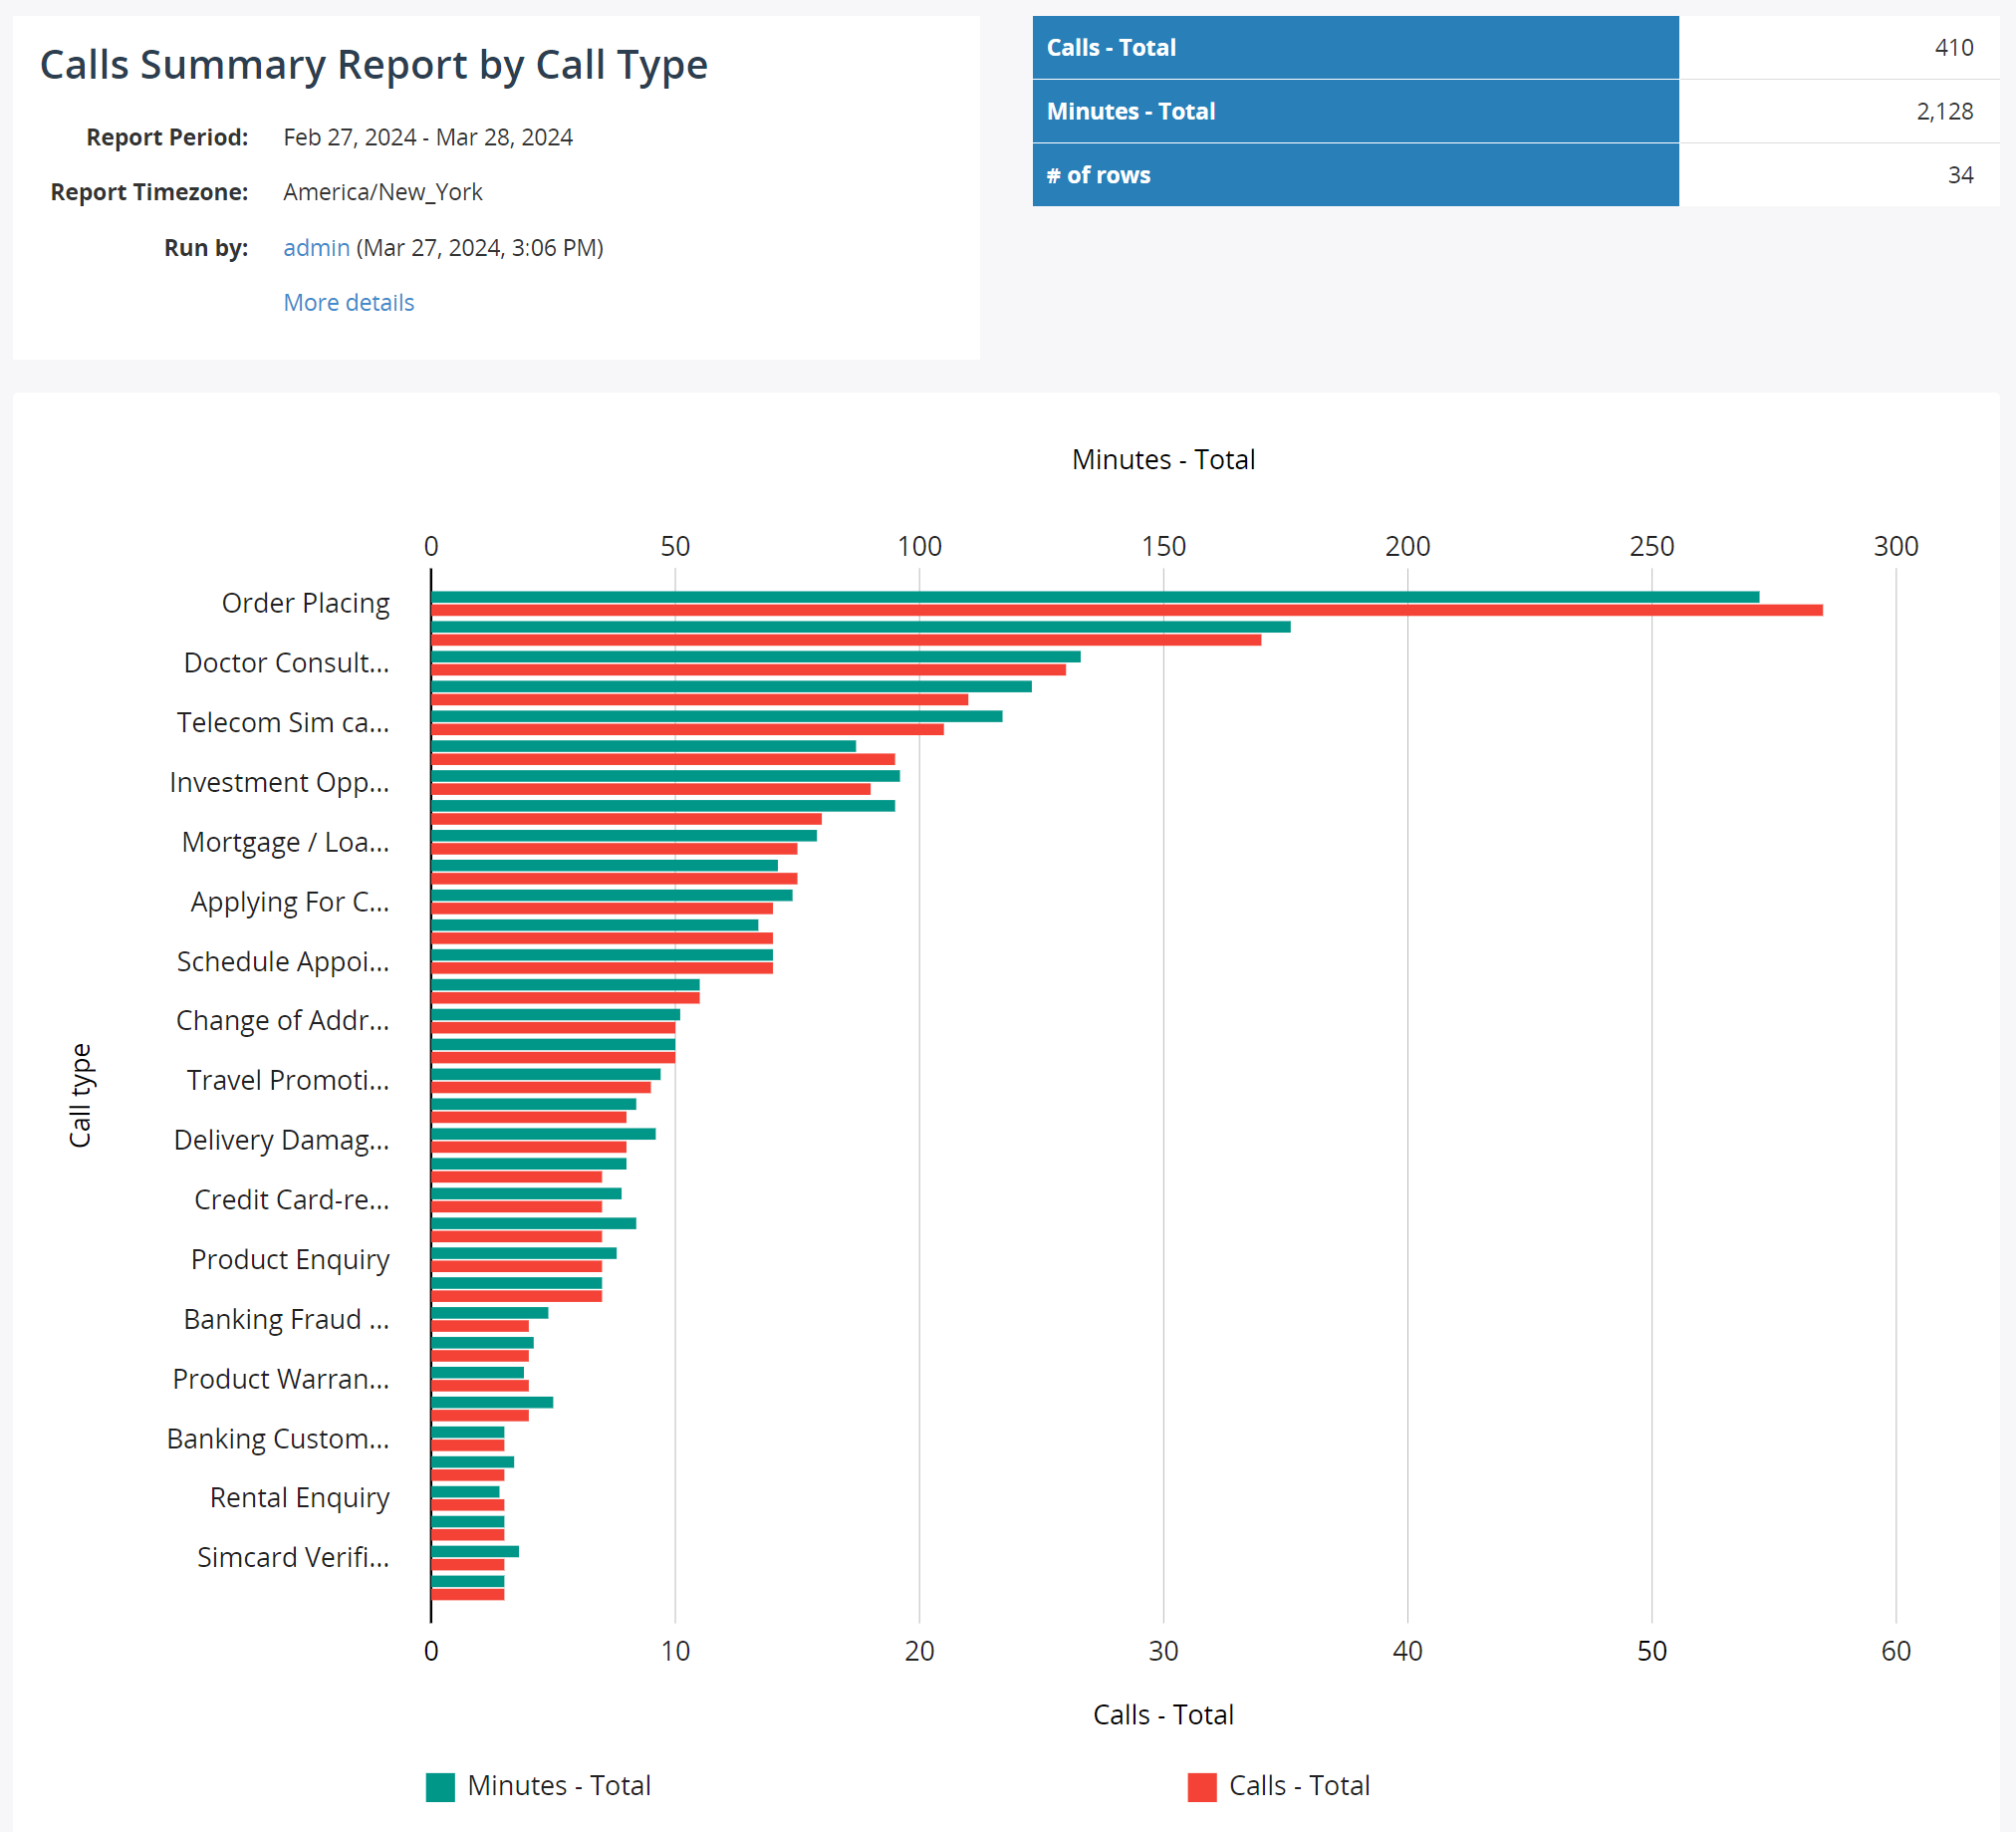 Call Summary Report by Call Type